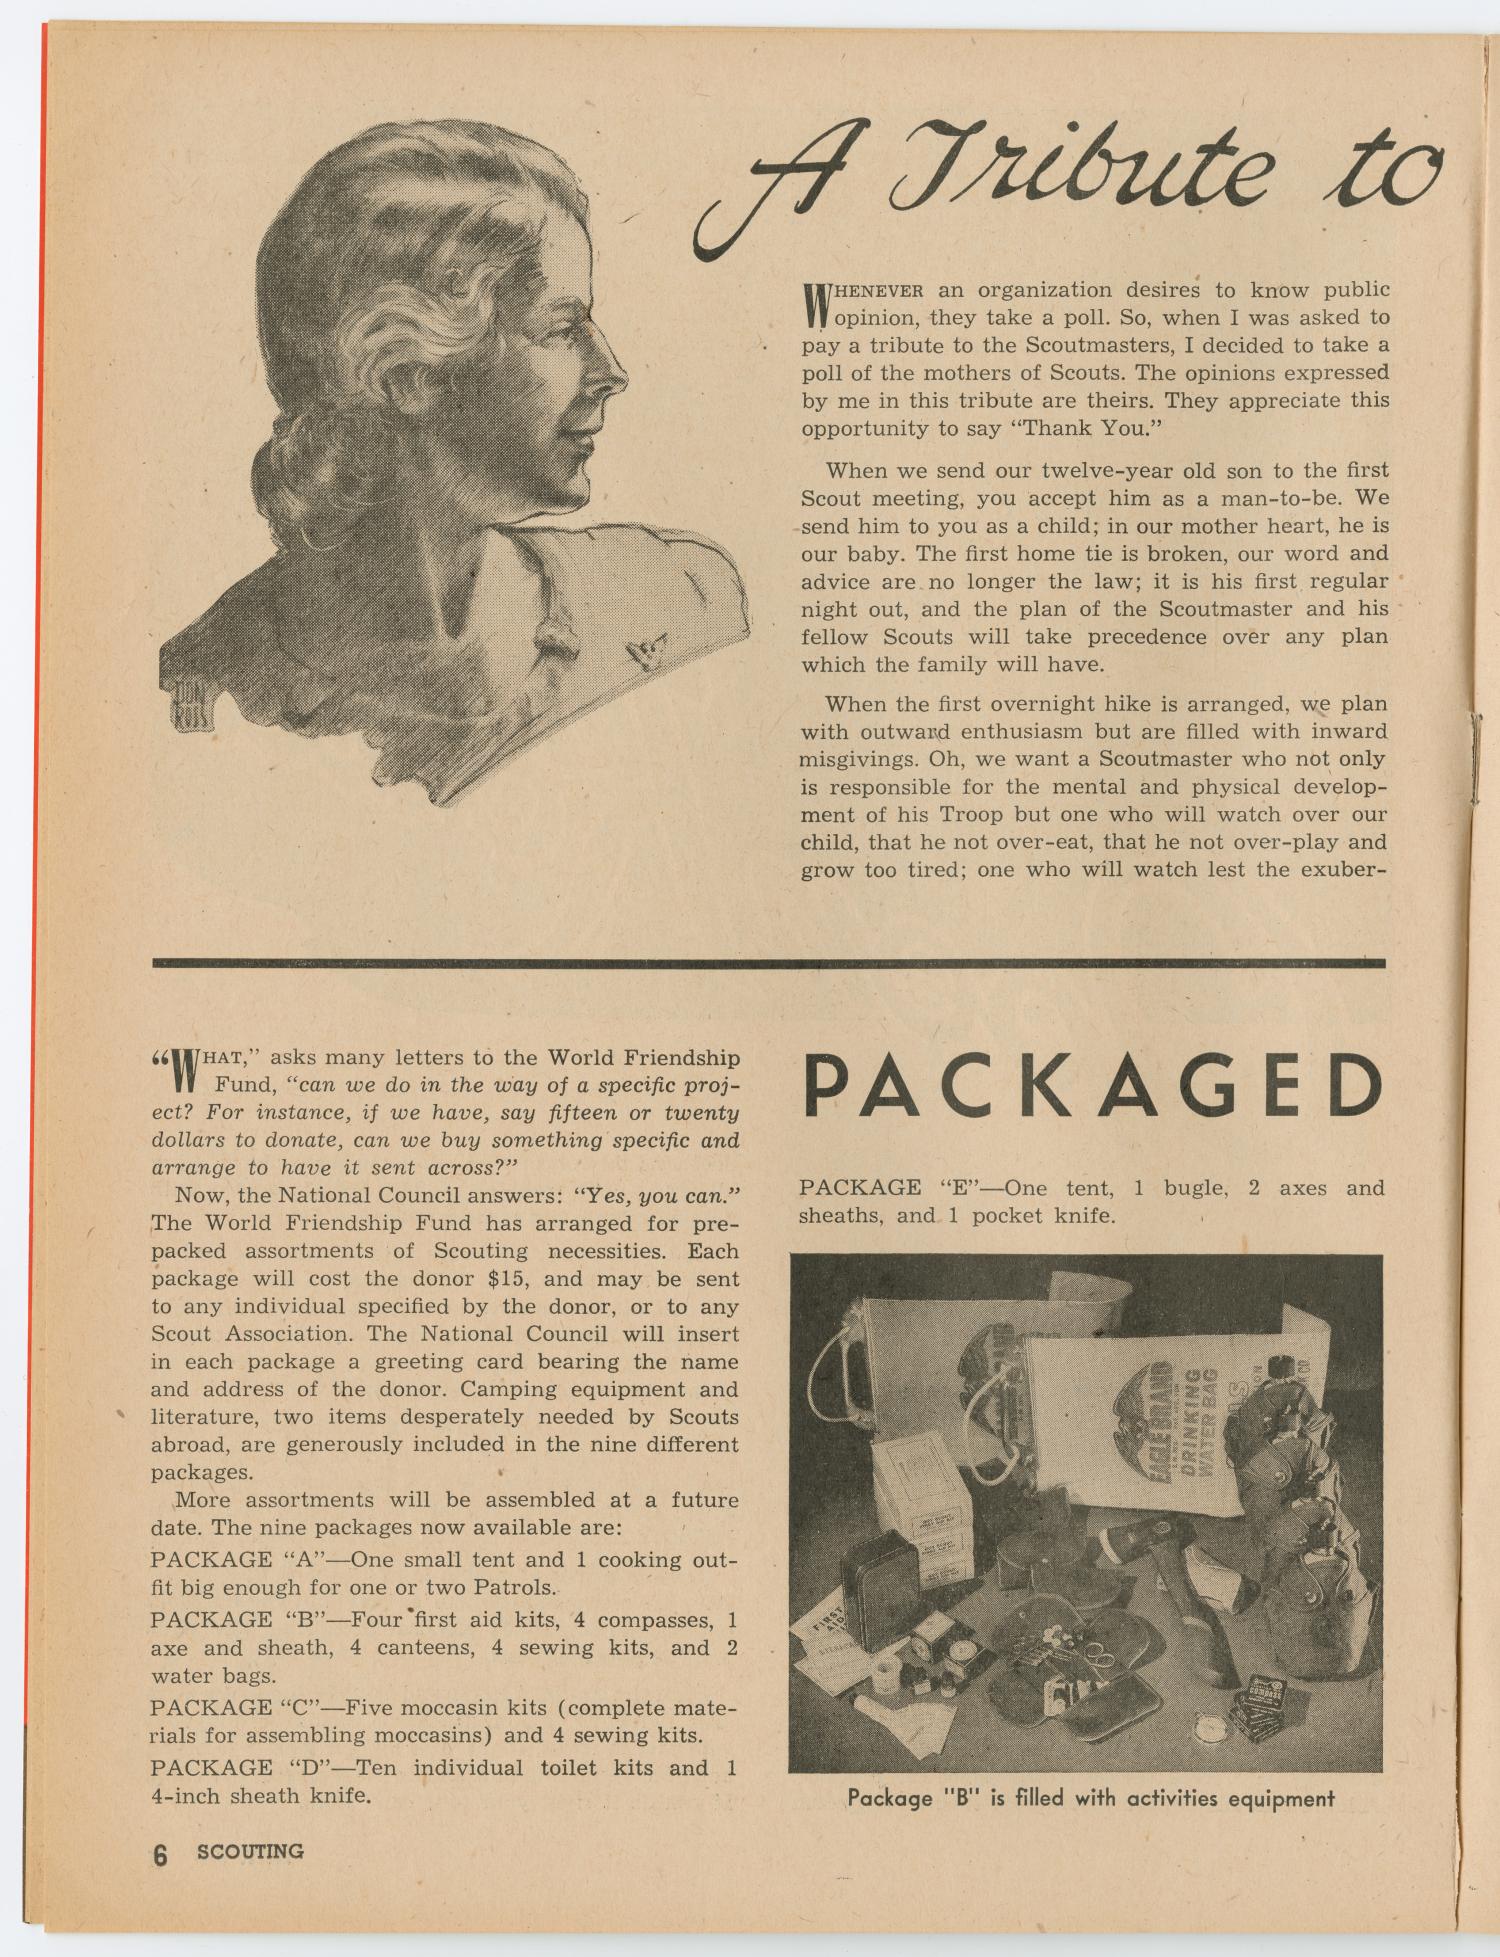 Scouting, Volume 35, Number 5, May 1947
                                                
                                                    6
                                                